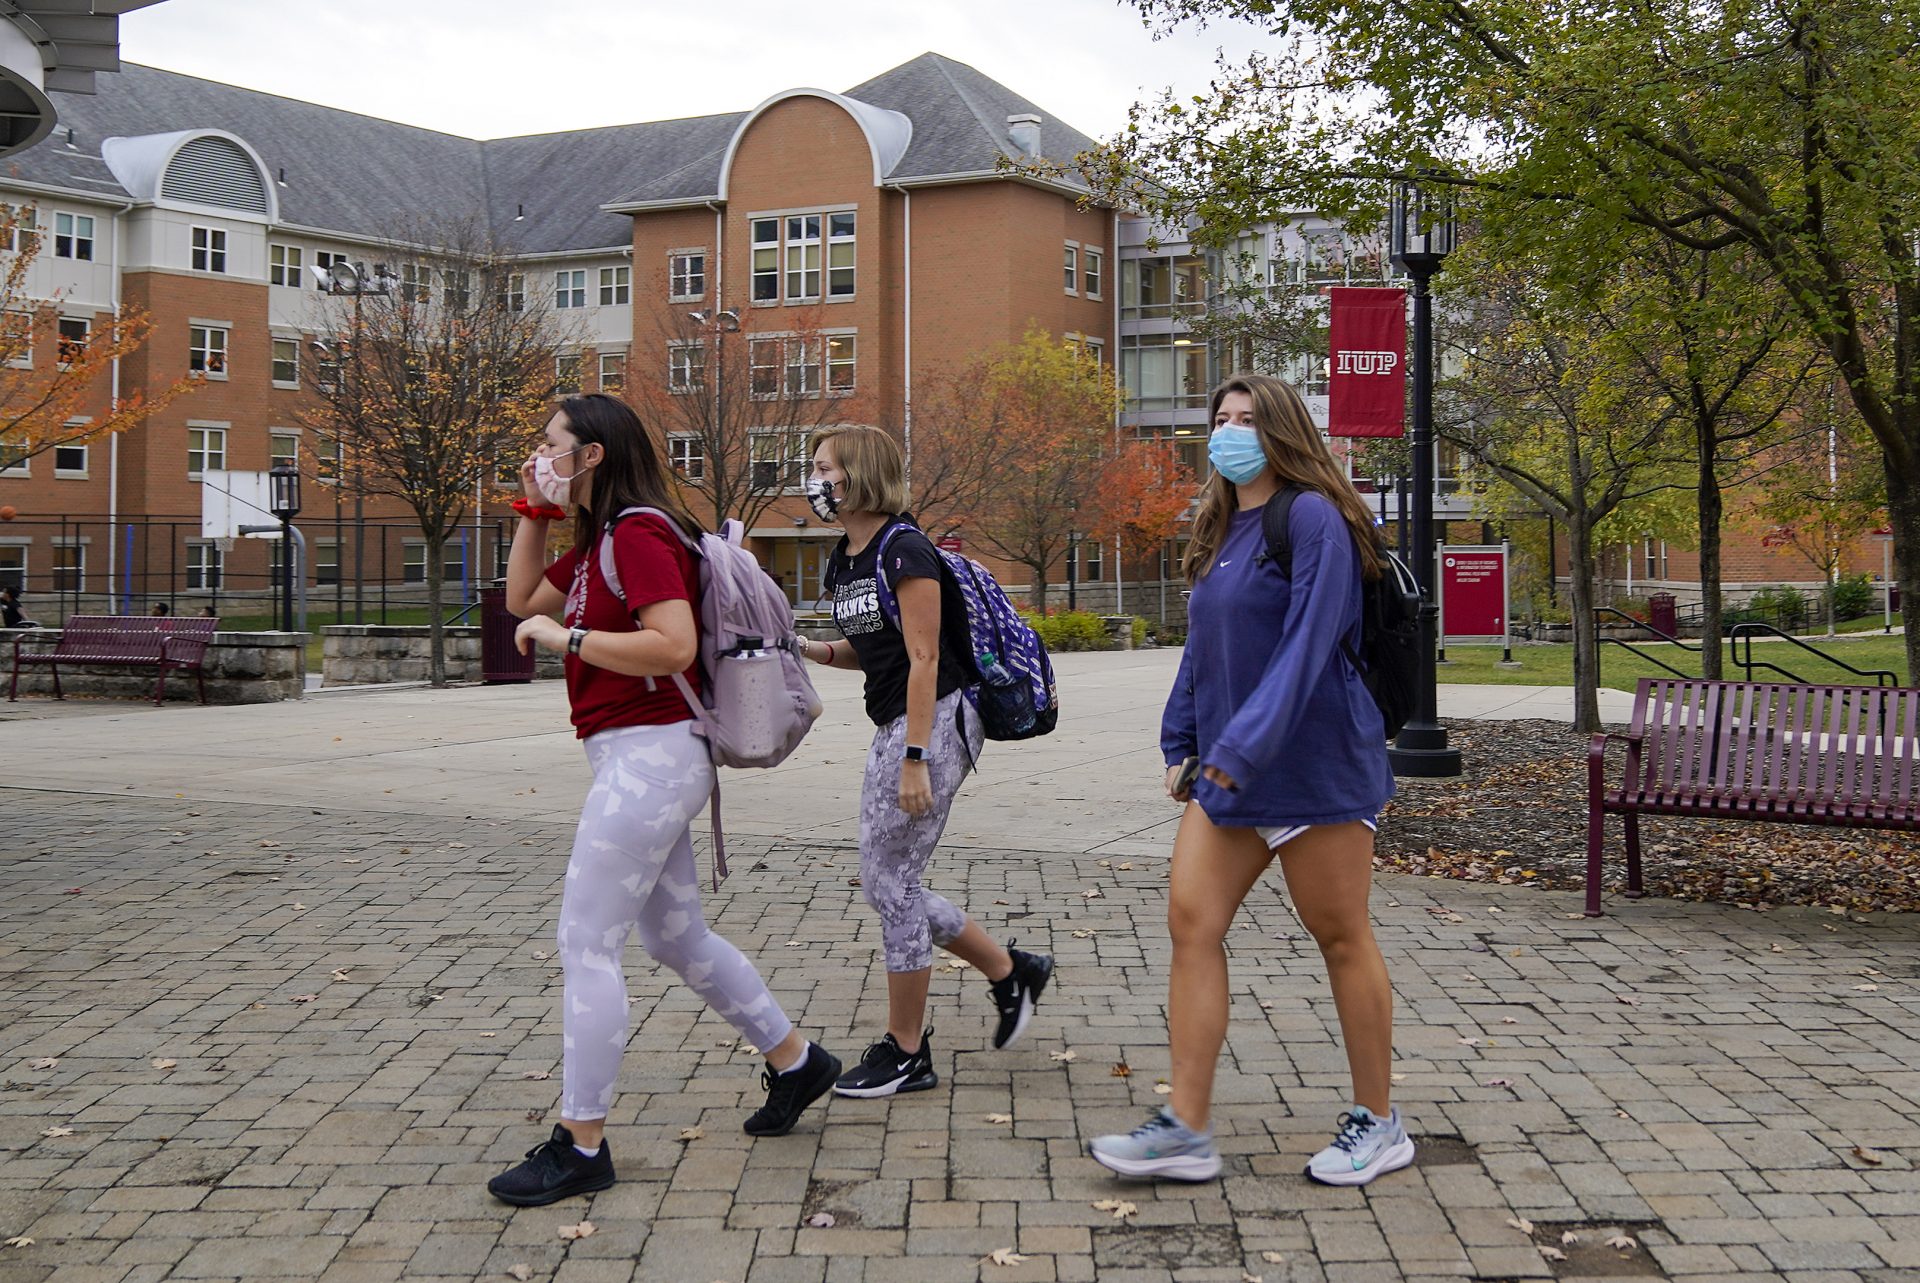 Students walk on the campus of Indiana University of Pennsylvania in Indiana, Pa, on Wednesday, Oct. 21, 2020.